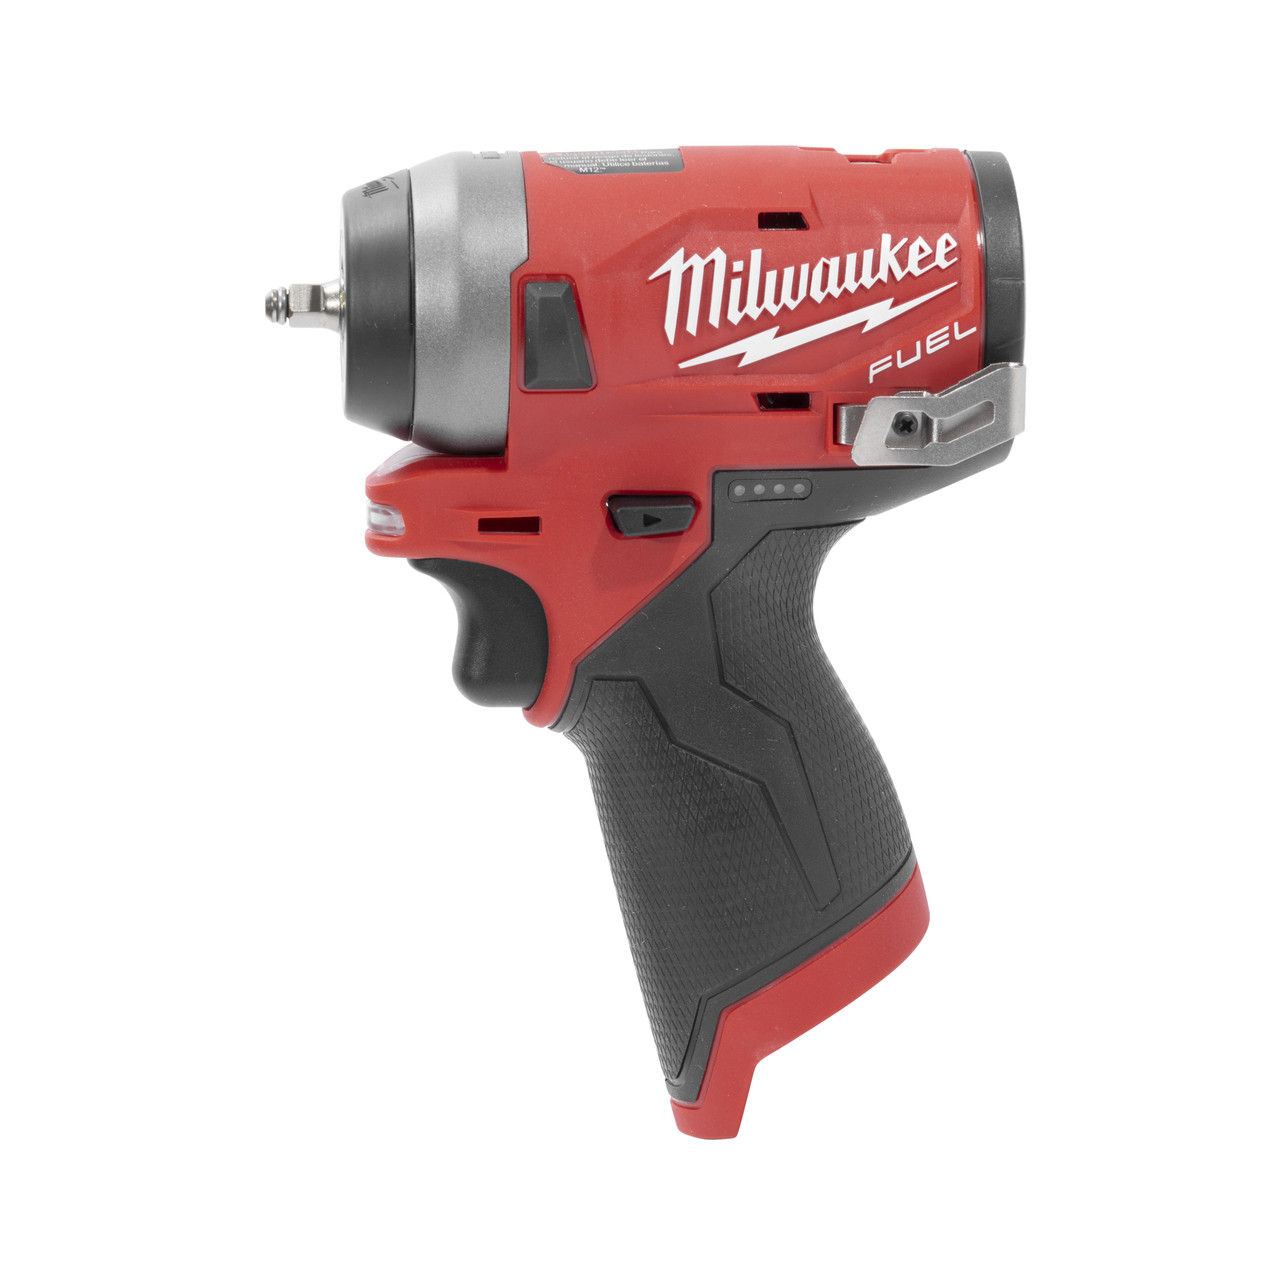 Milwaukee M12 Stubby Impact Wrench With 1/4” Drive 100 Ft-Lb Torque  (2552-20) JB Tools